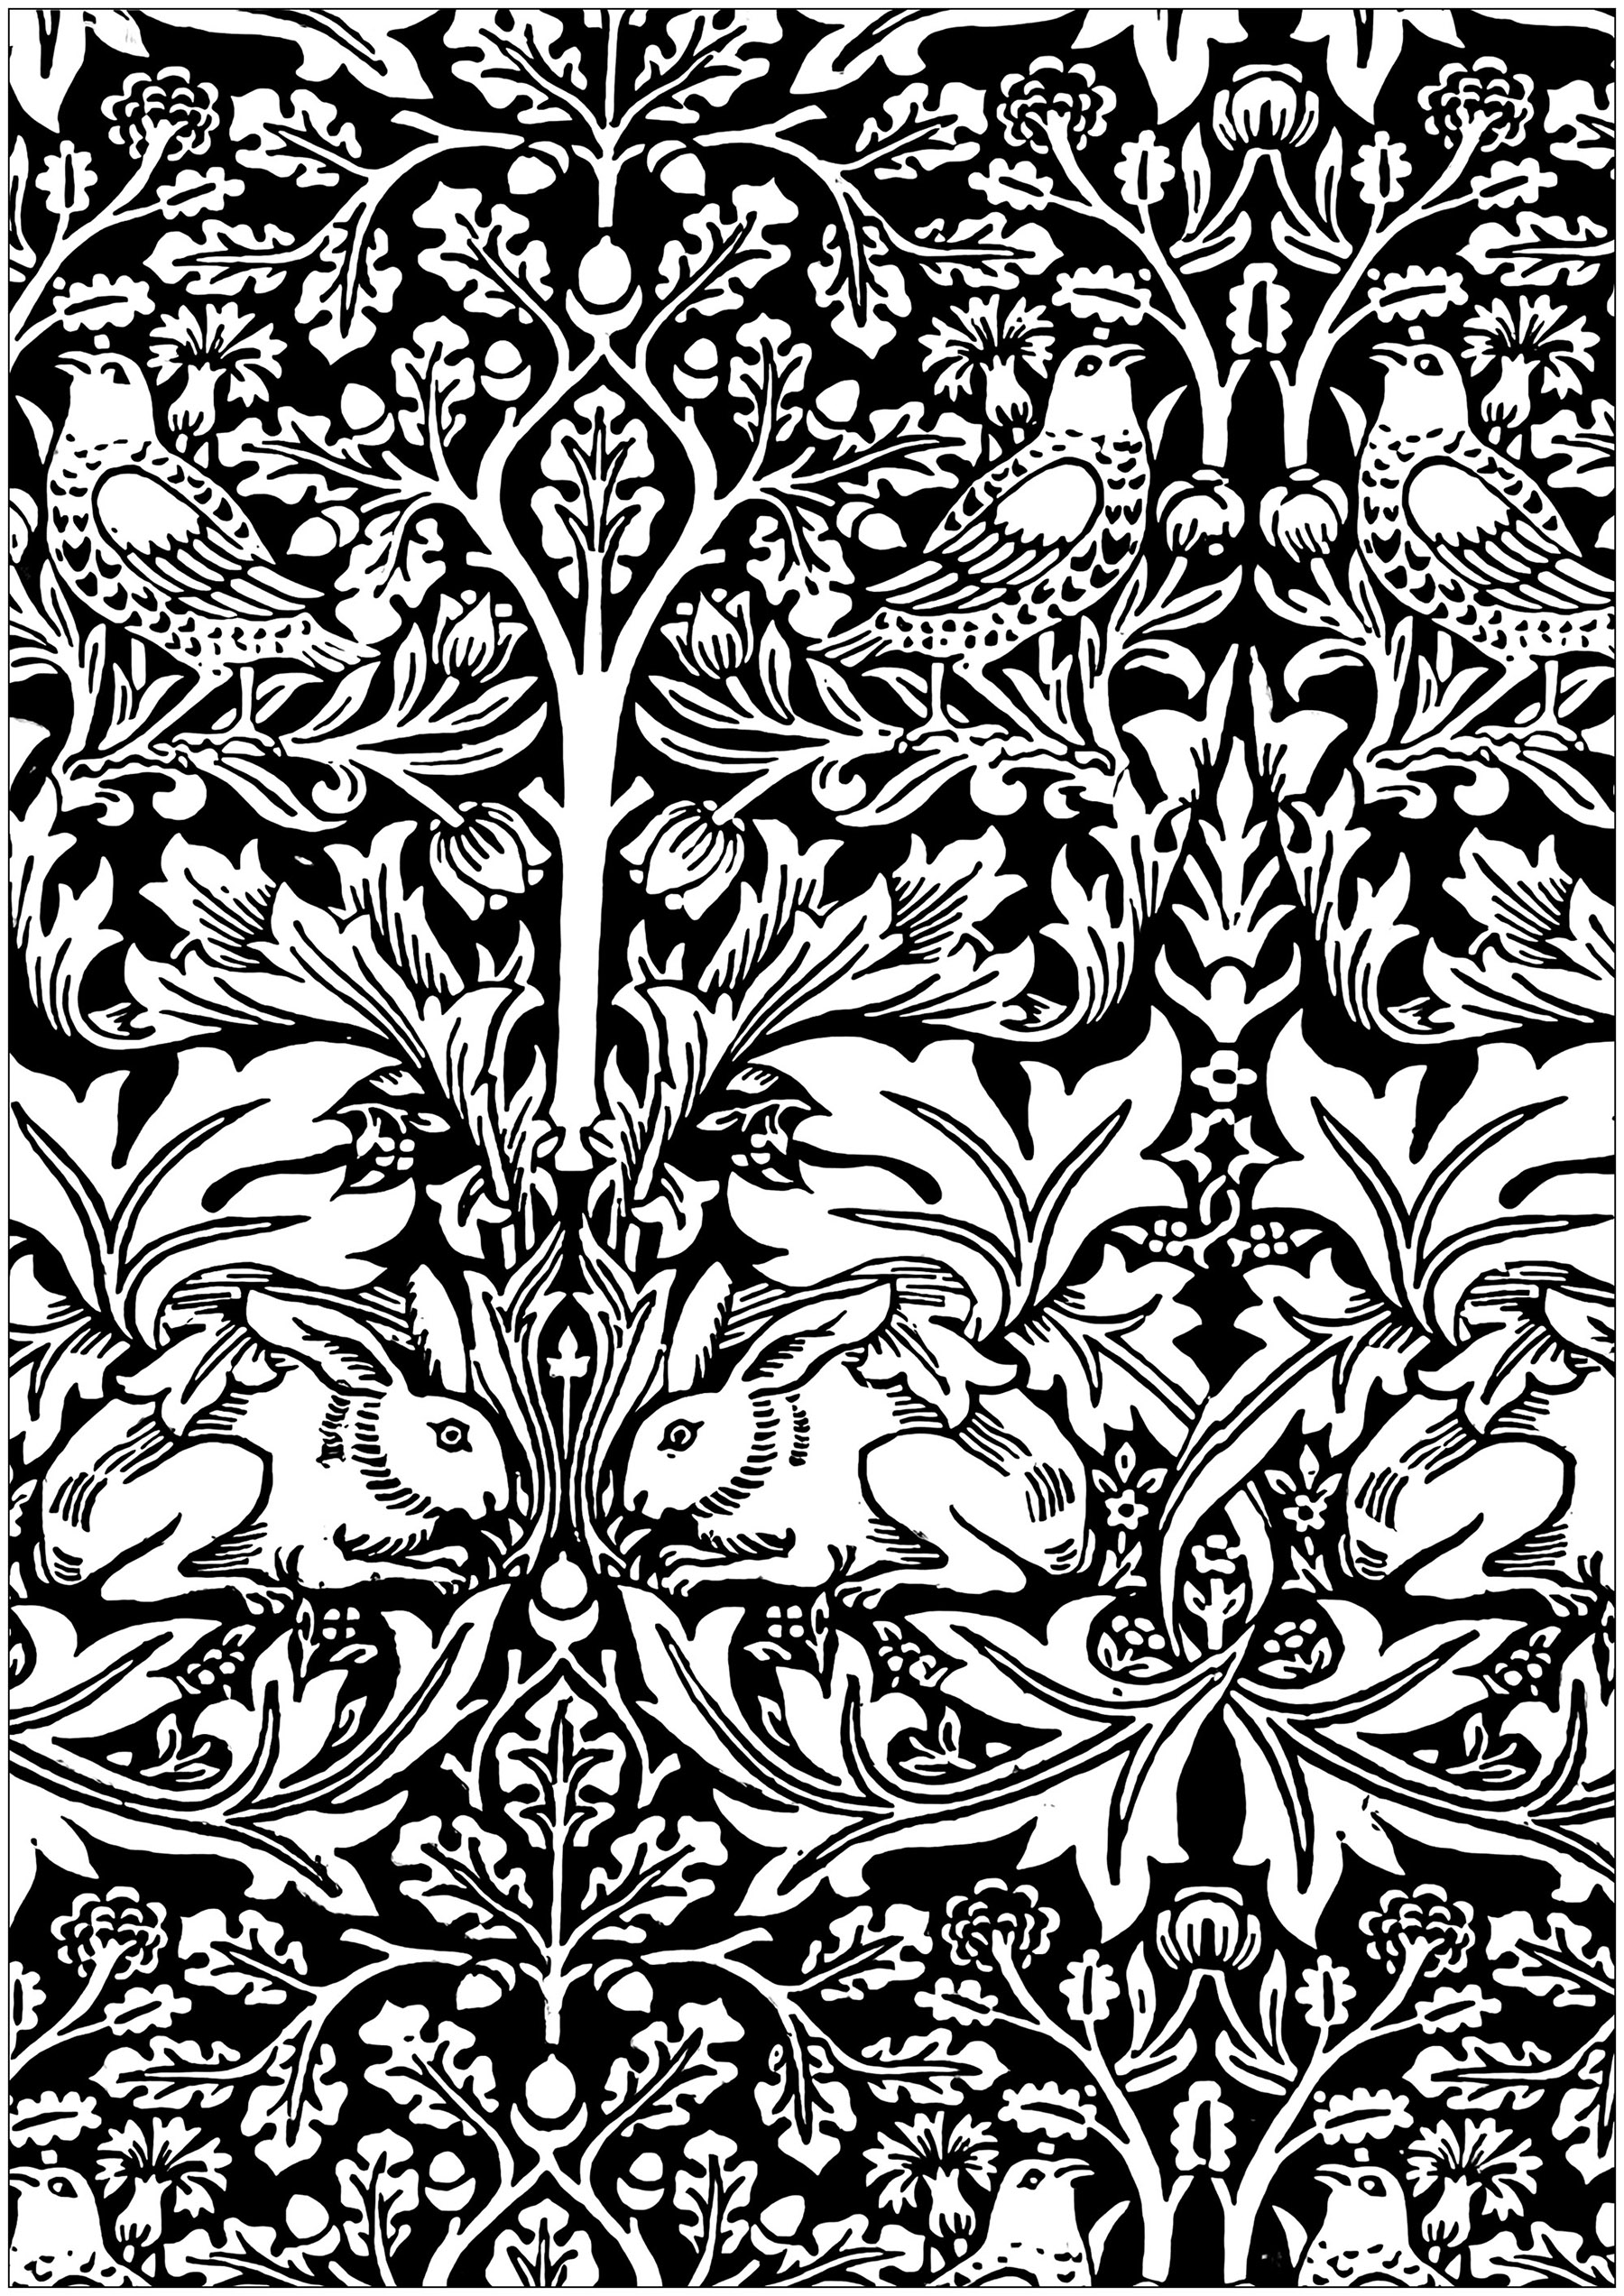 Coloring page created from a printed cotton board by William Morris : 'Brother rabbit' (1882). The title is inspired by a traditional African-American tale 'Brer Rabbit', which was adapted and published by Joel Chandler Harris in 1881.
Morris' use of the paired animals and birds among fantastic foliage in this design clearly illustrates his interest in medieval European textiles.